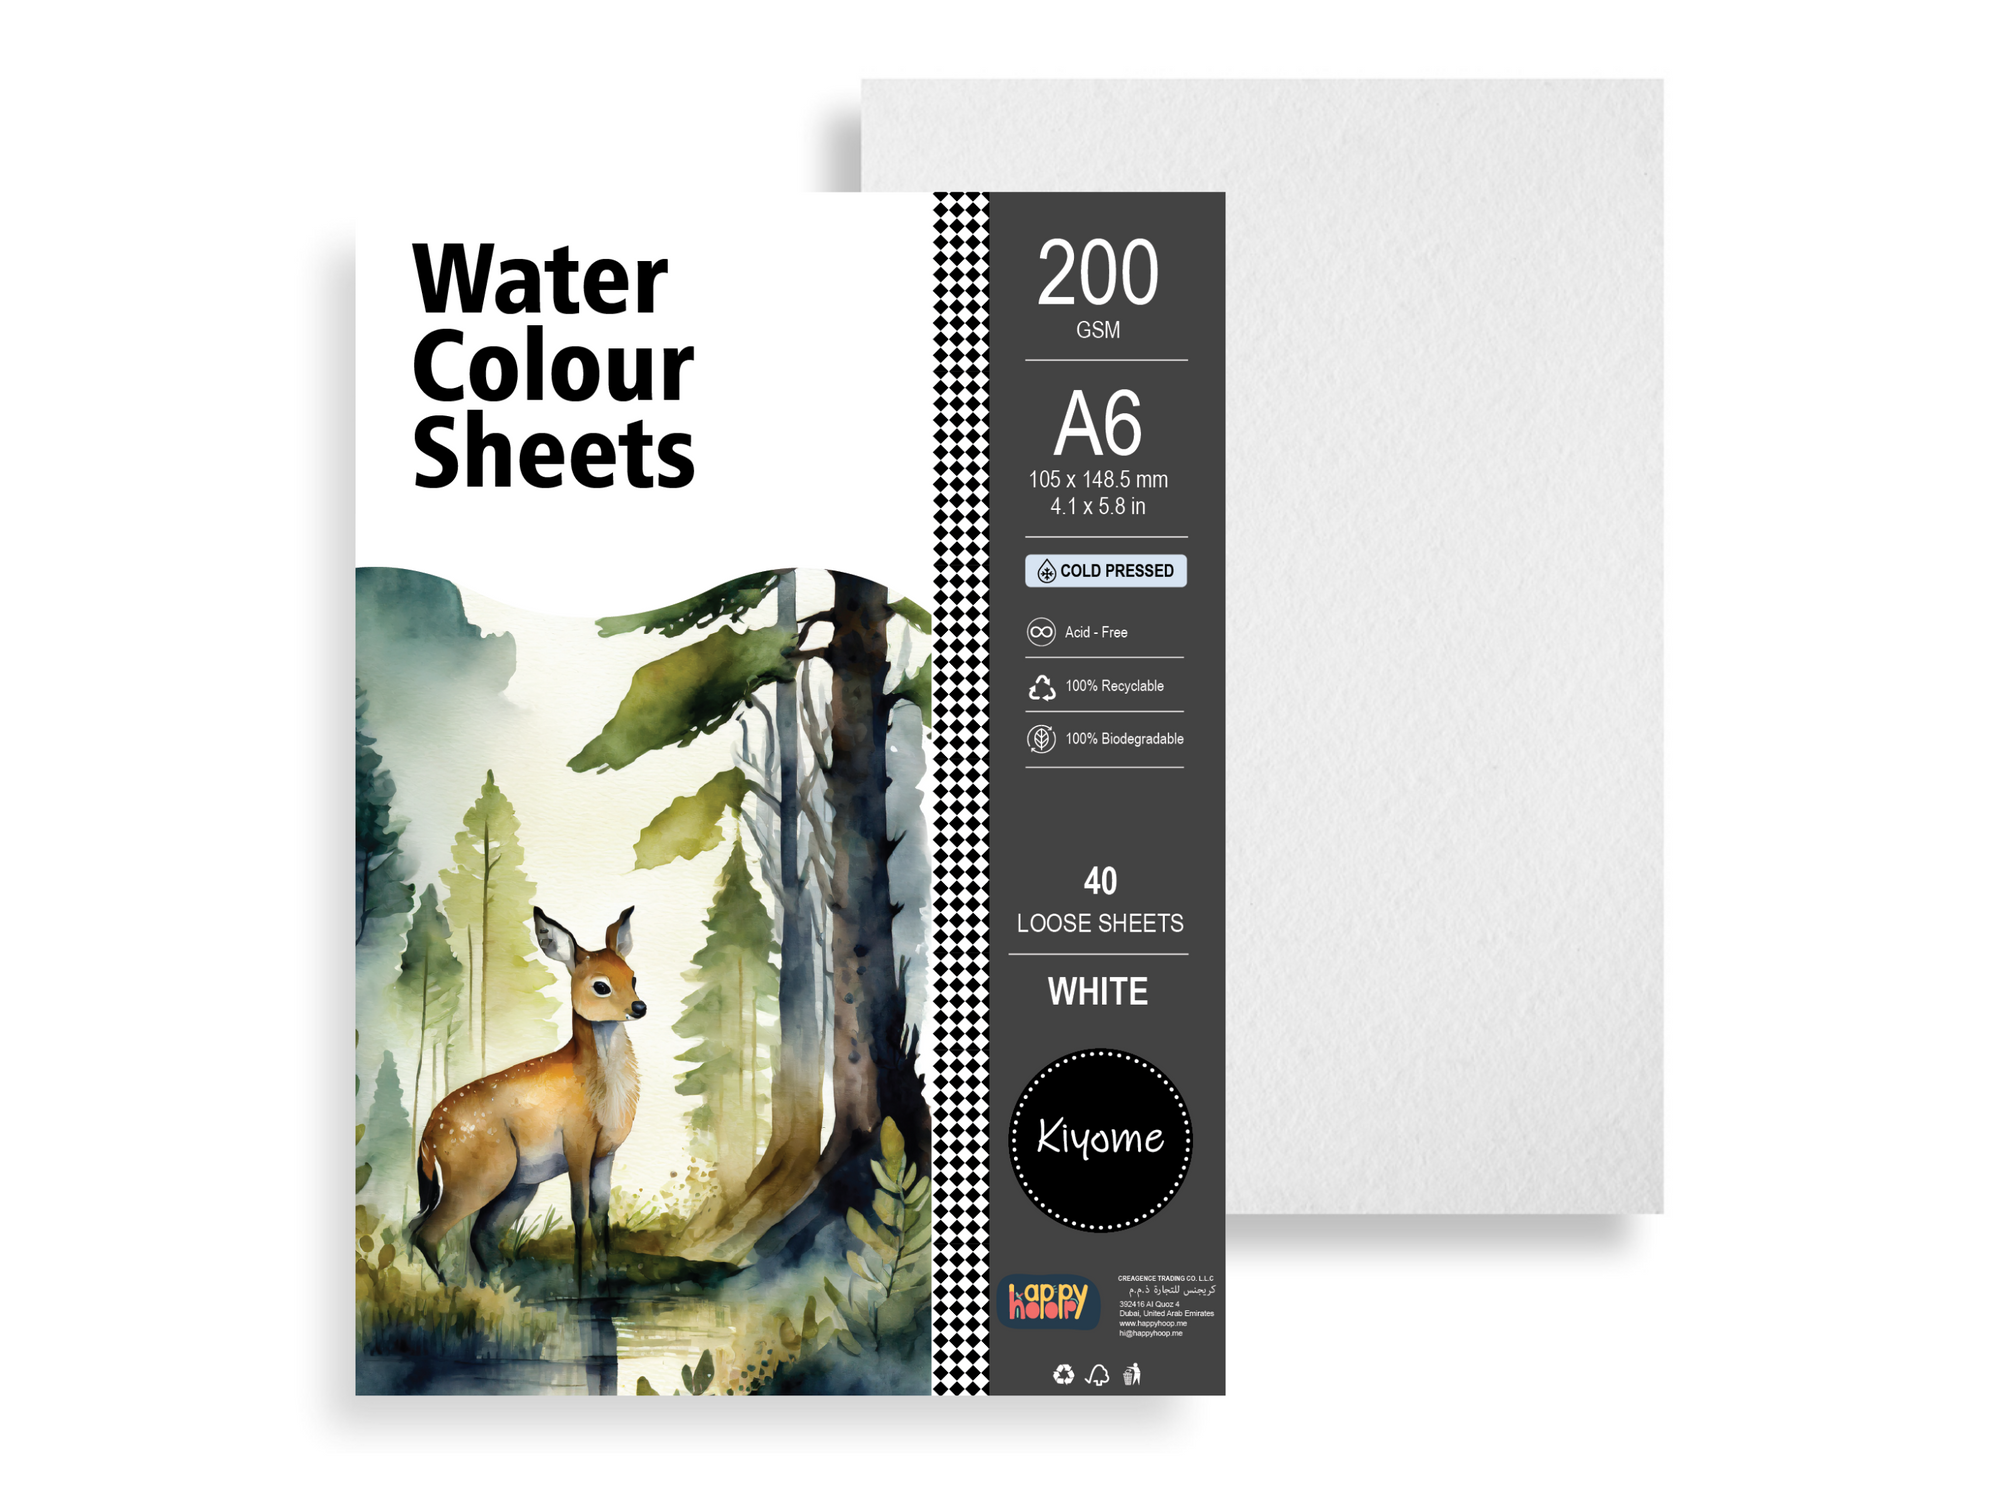 Kiyome Watercolour Sheets | 200 GSM | Cold Pressed | A6 | 40 Sheets